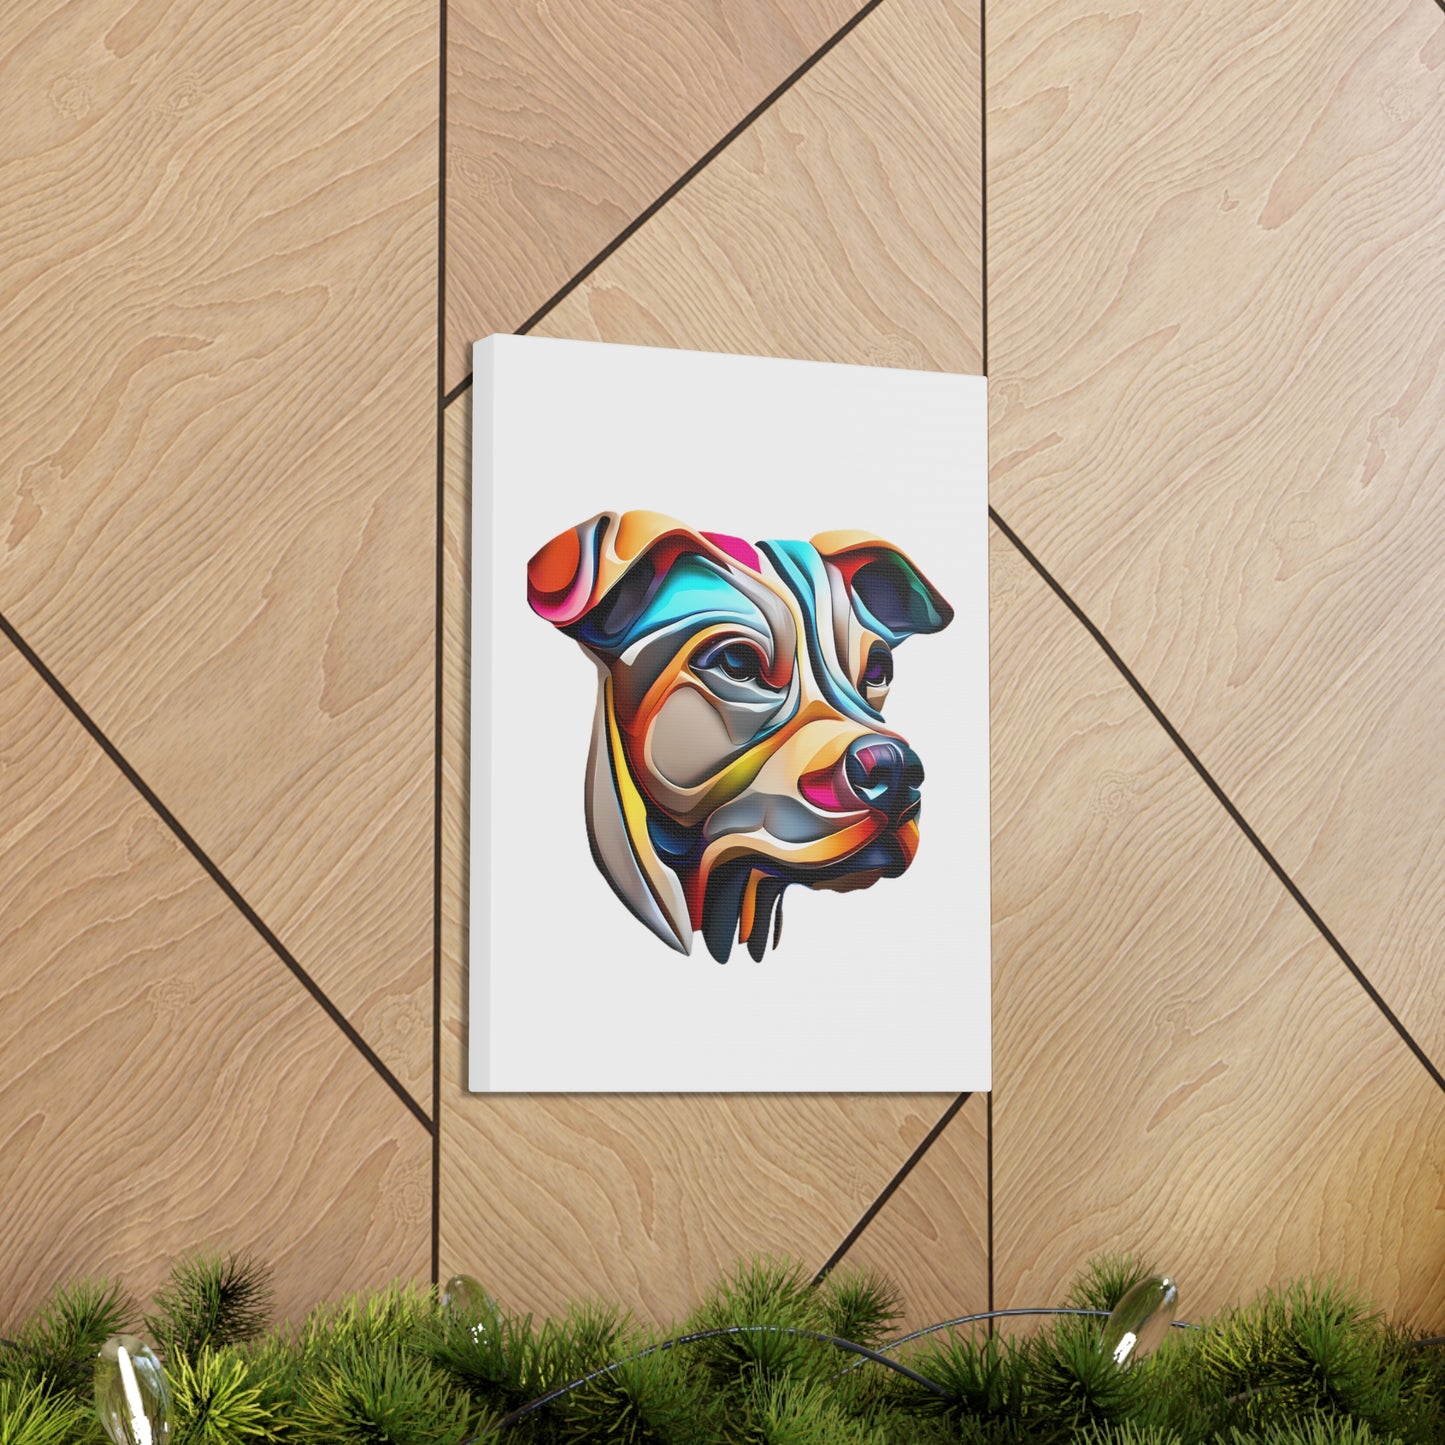 Unique 3D Canvas Wildlife Wall Art Gallery Wraps - Dog Wall Decor Living Room Art- Colorful